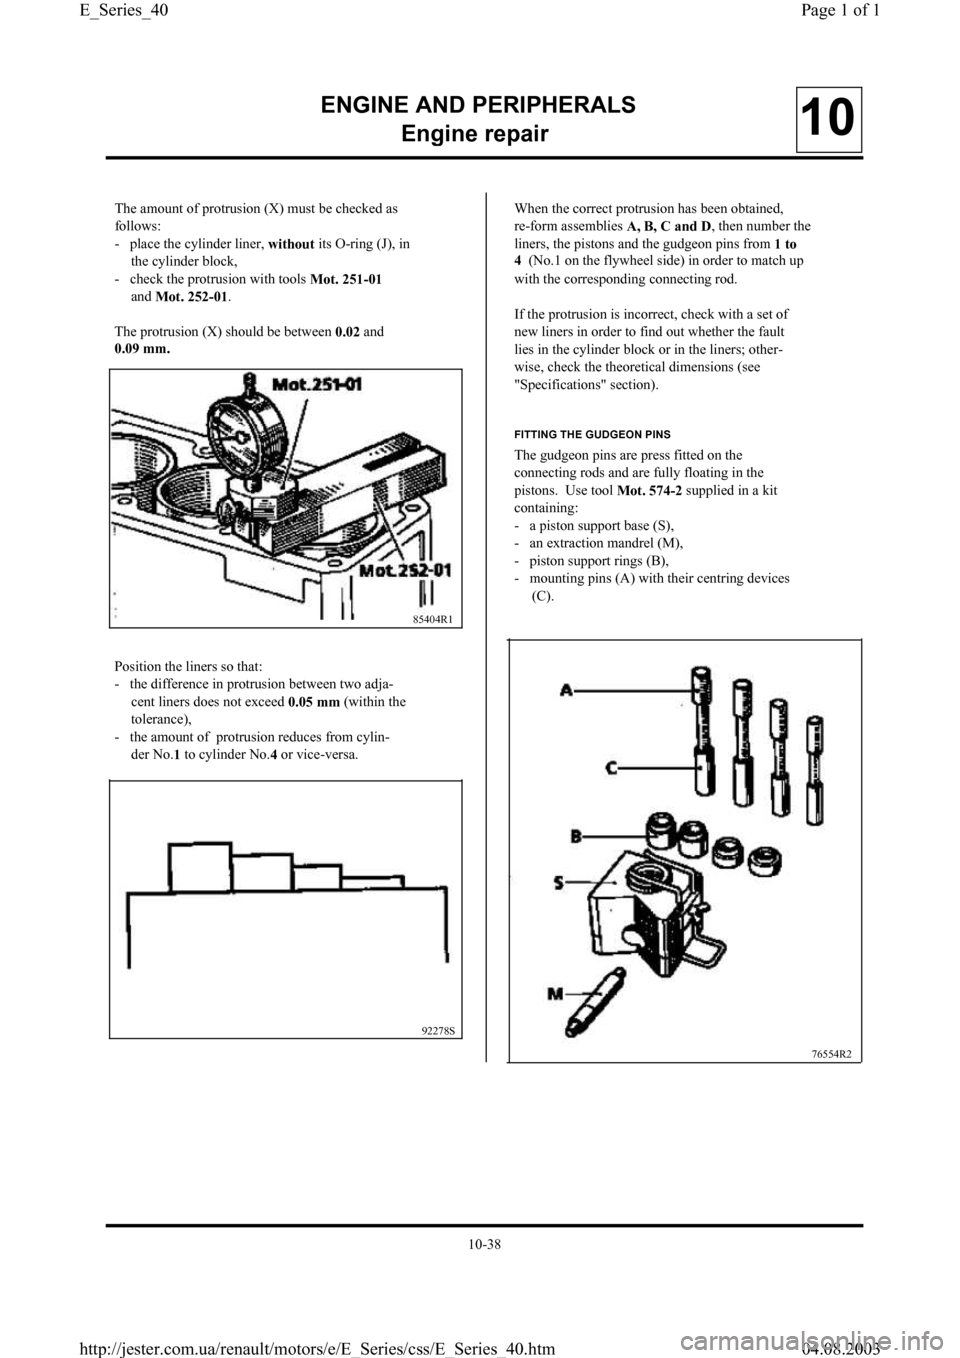 RENAULT CLIO 1997 X57 / 1.G Petrol Engines Workshop Manual ENGINE AND PERIPHERALS
En
gine repair10
The amount of protrusion (X) must be checked as
follows:
-   place the cylinder liner, 
without its O-ring (J), in
the cylinder block,
-   check the protrusion 